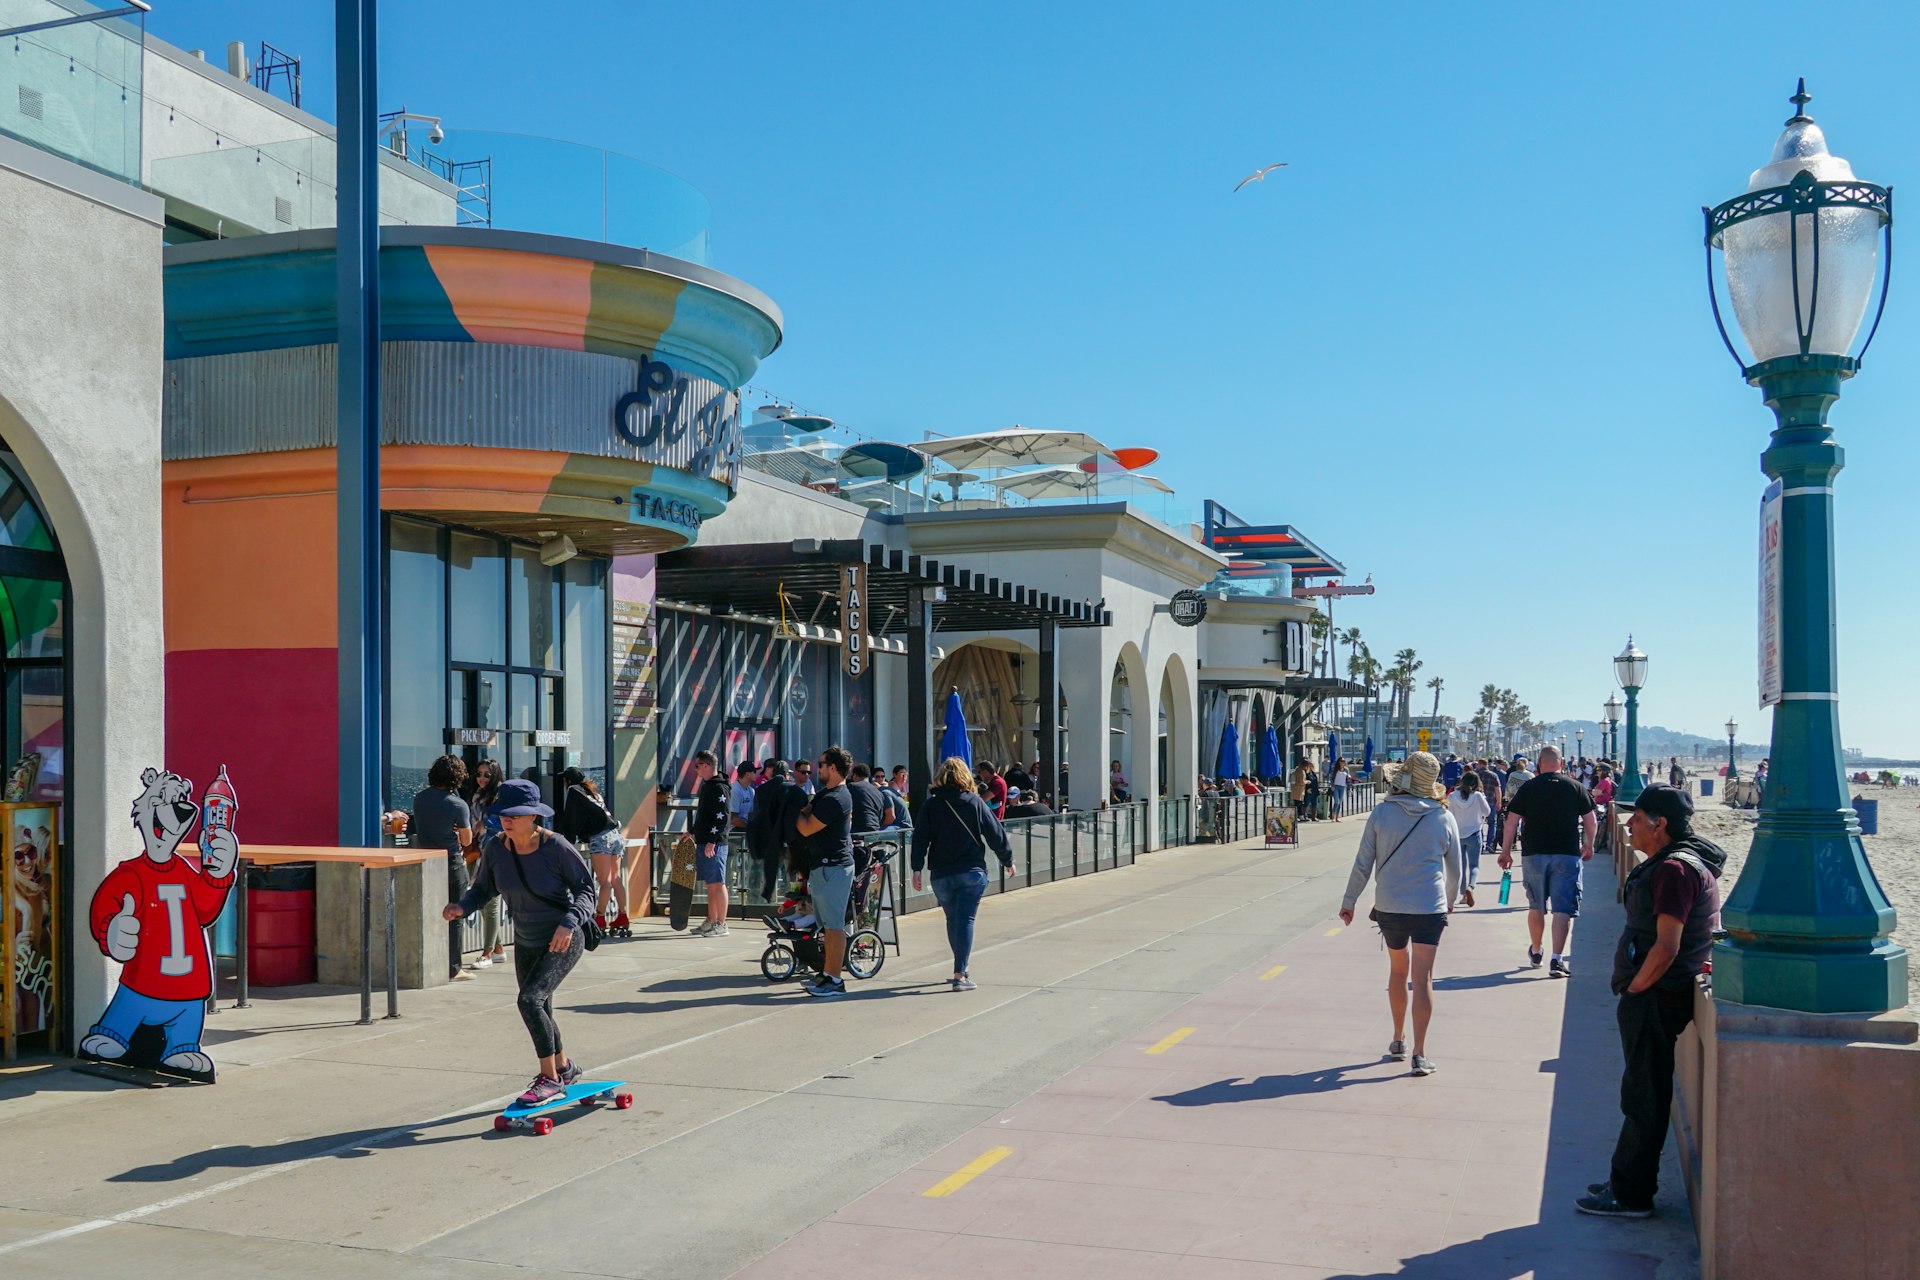 The Mission Beach boardwalk, a concrete walkway shared by walkers and bicyclists.